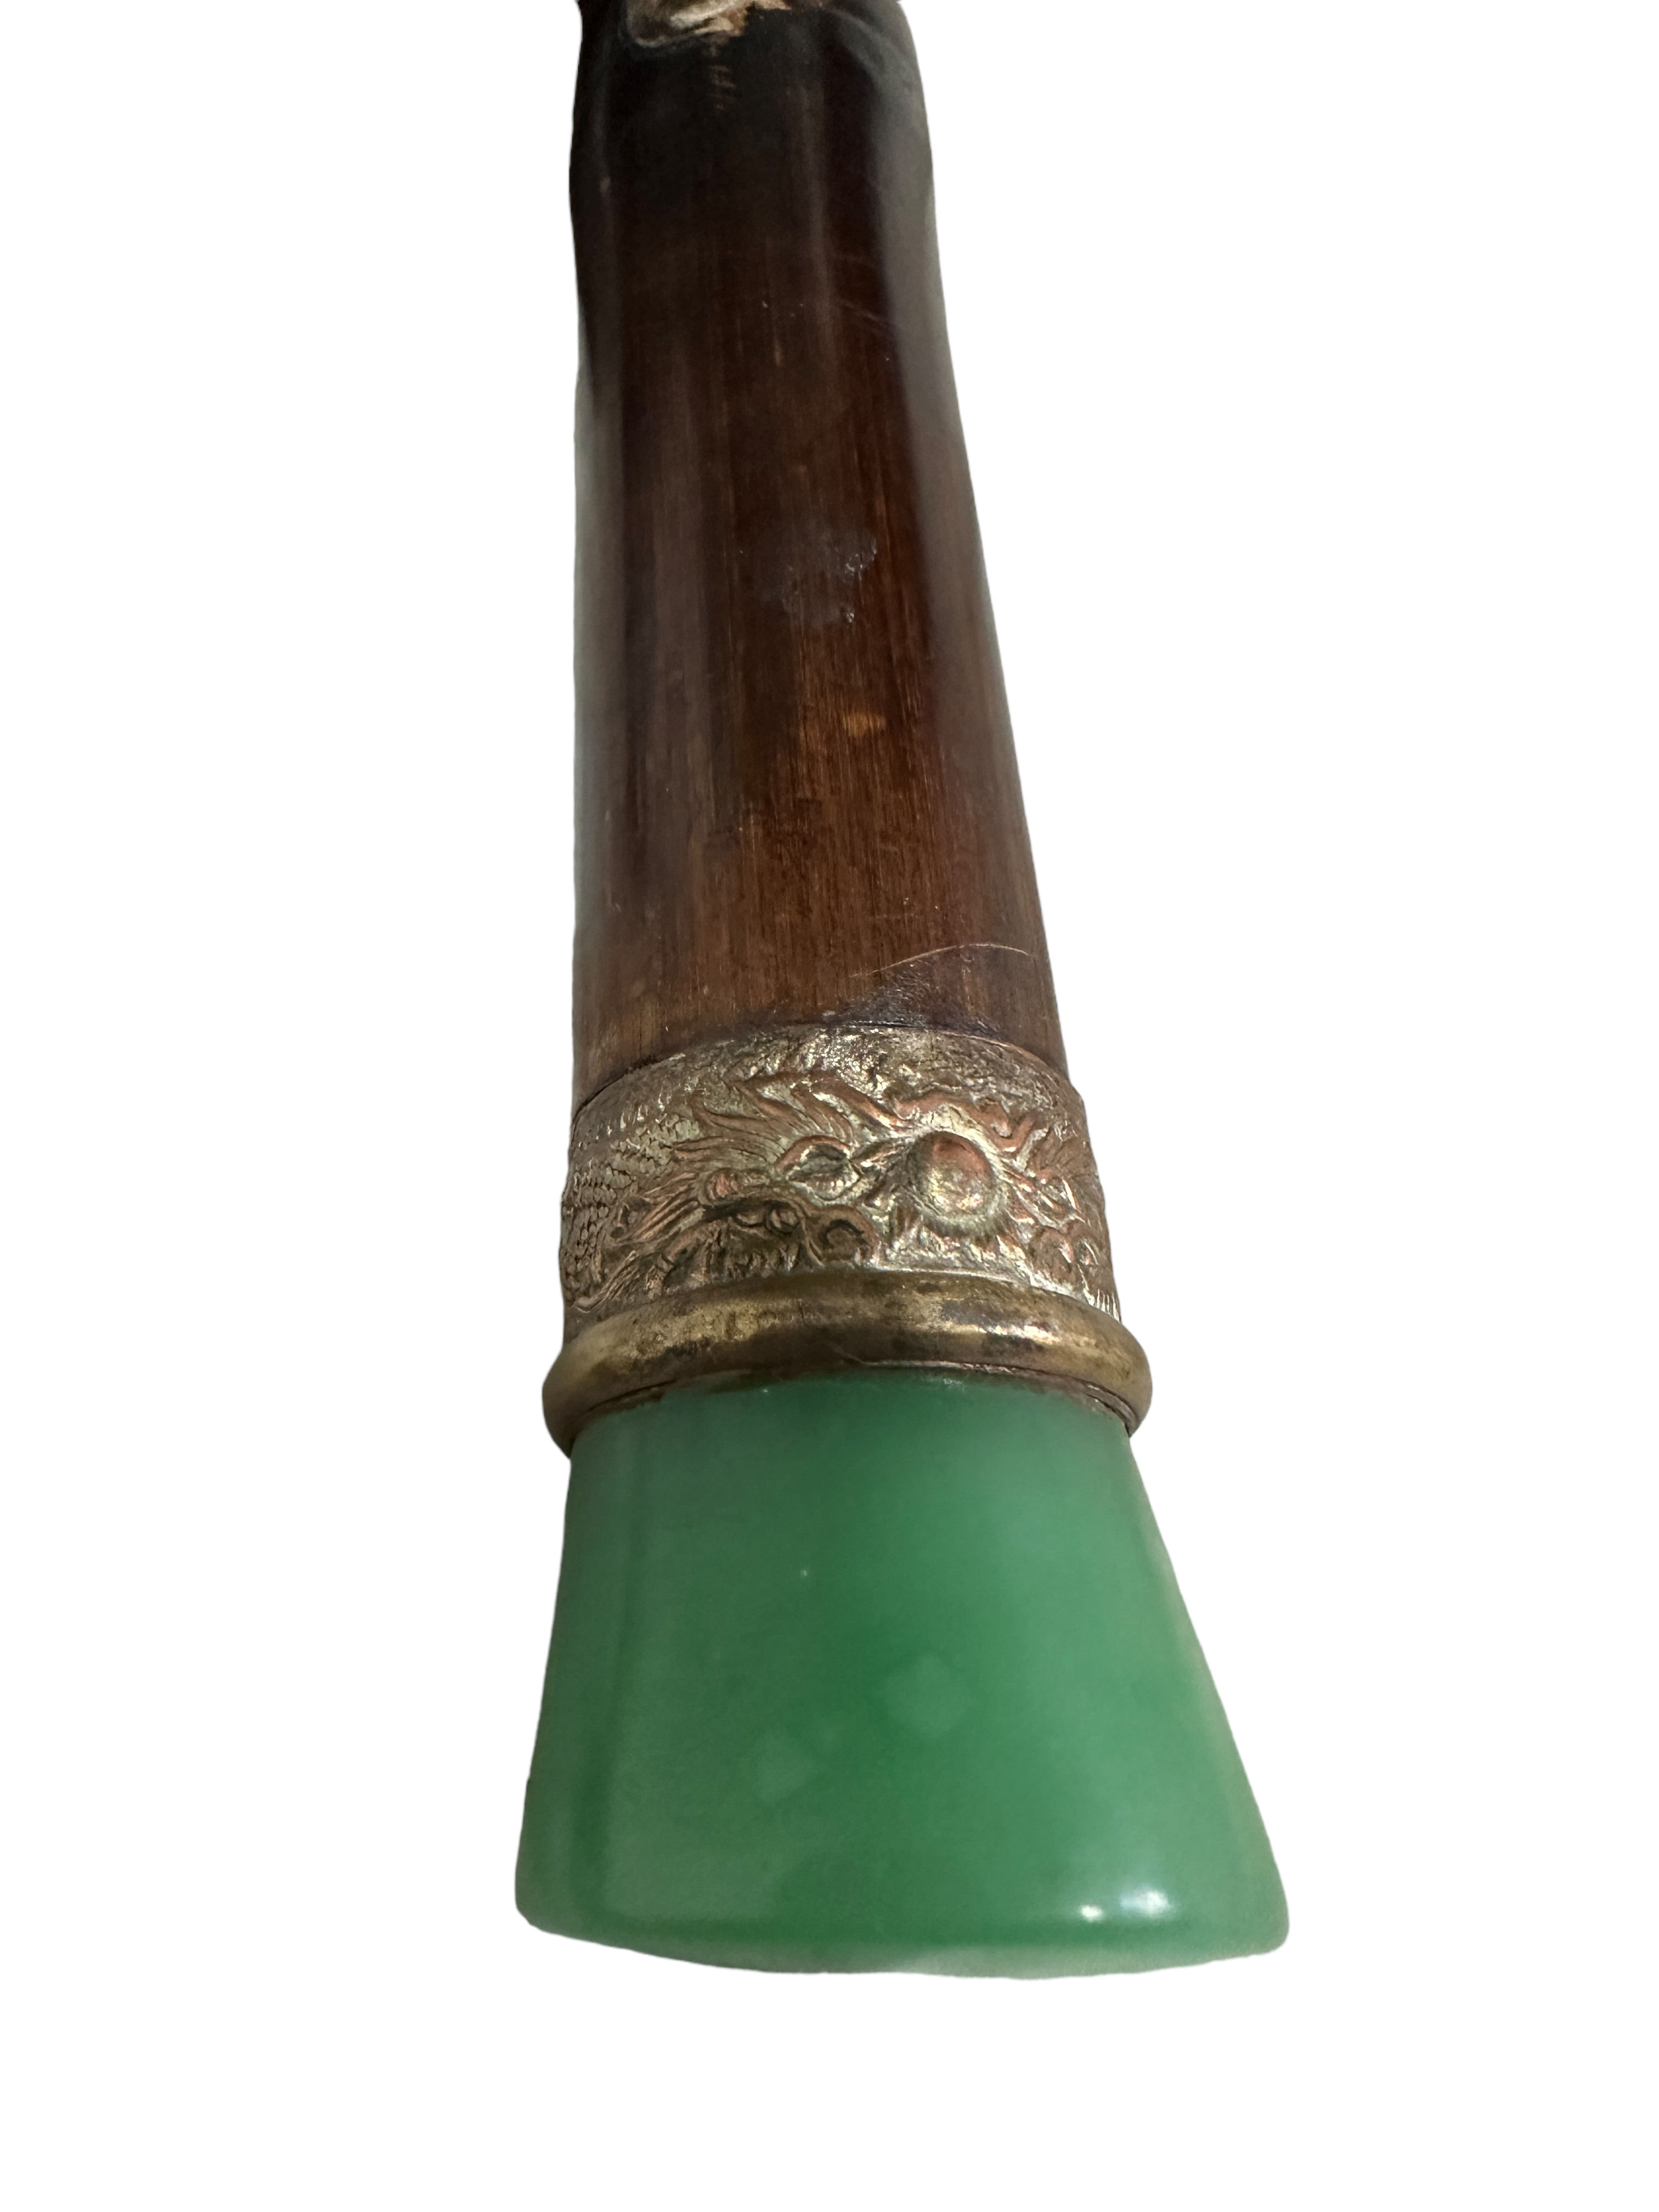 Lot of Opium Pipe with Jade Fittings on Stand-Bone and Wood Opium Pipes+2 Resin examples - Image 4 of 11